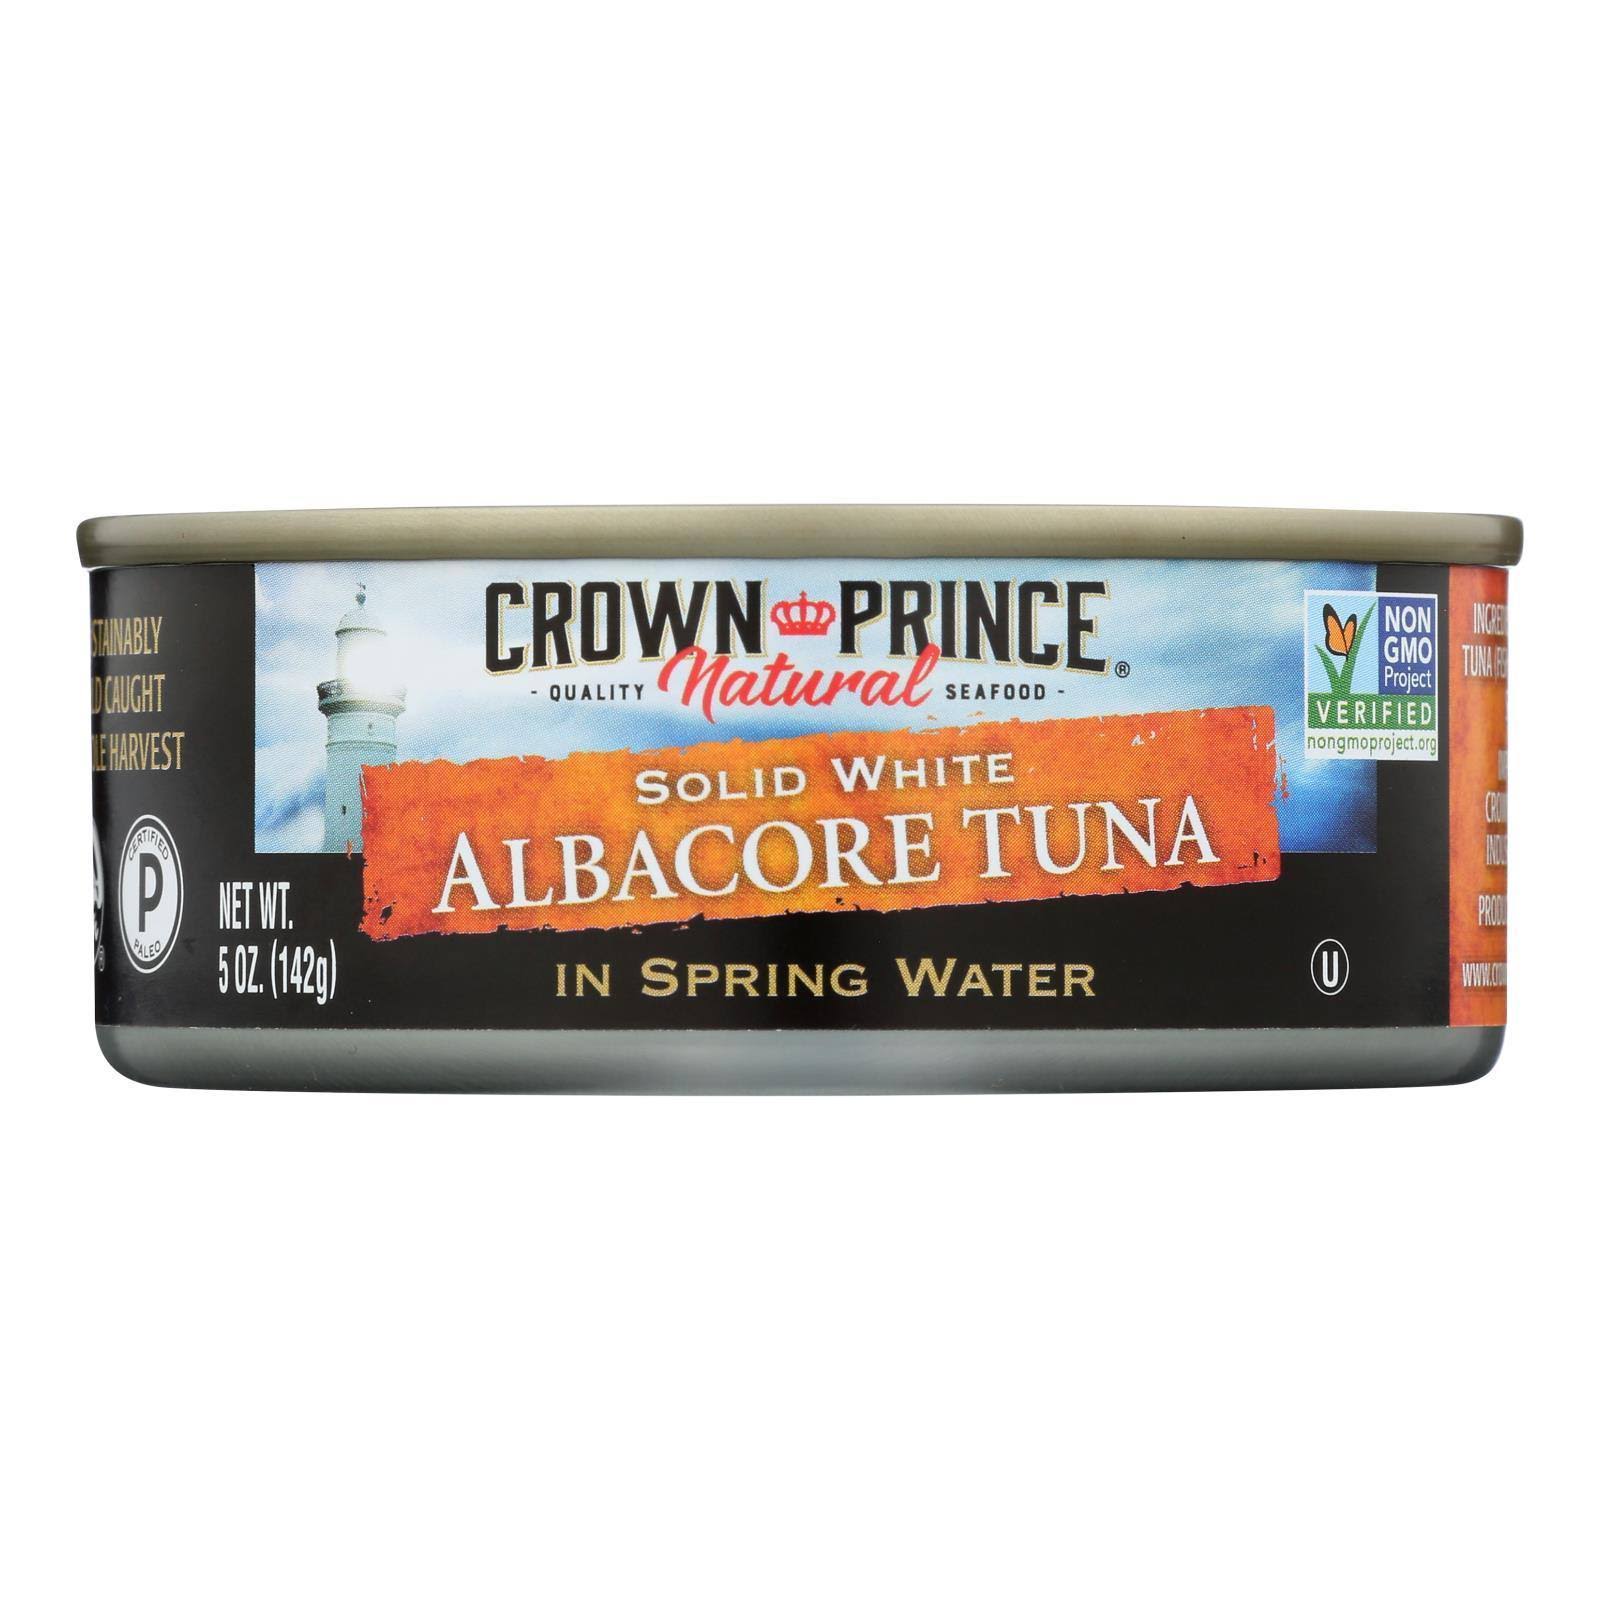 Crown Prince Natural Solid White Albacore Tuna in Spring Water 5 oz (142 g)